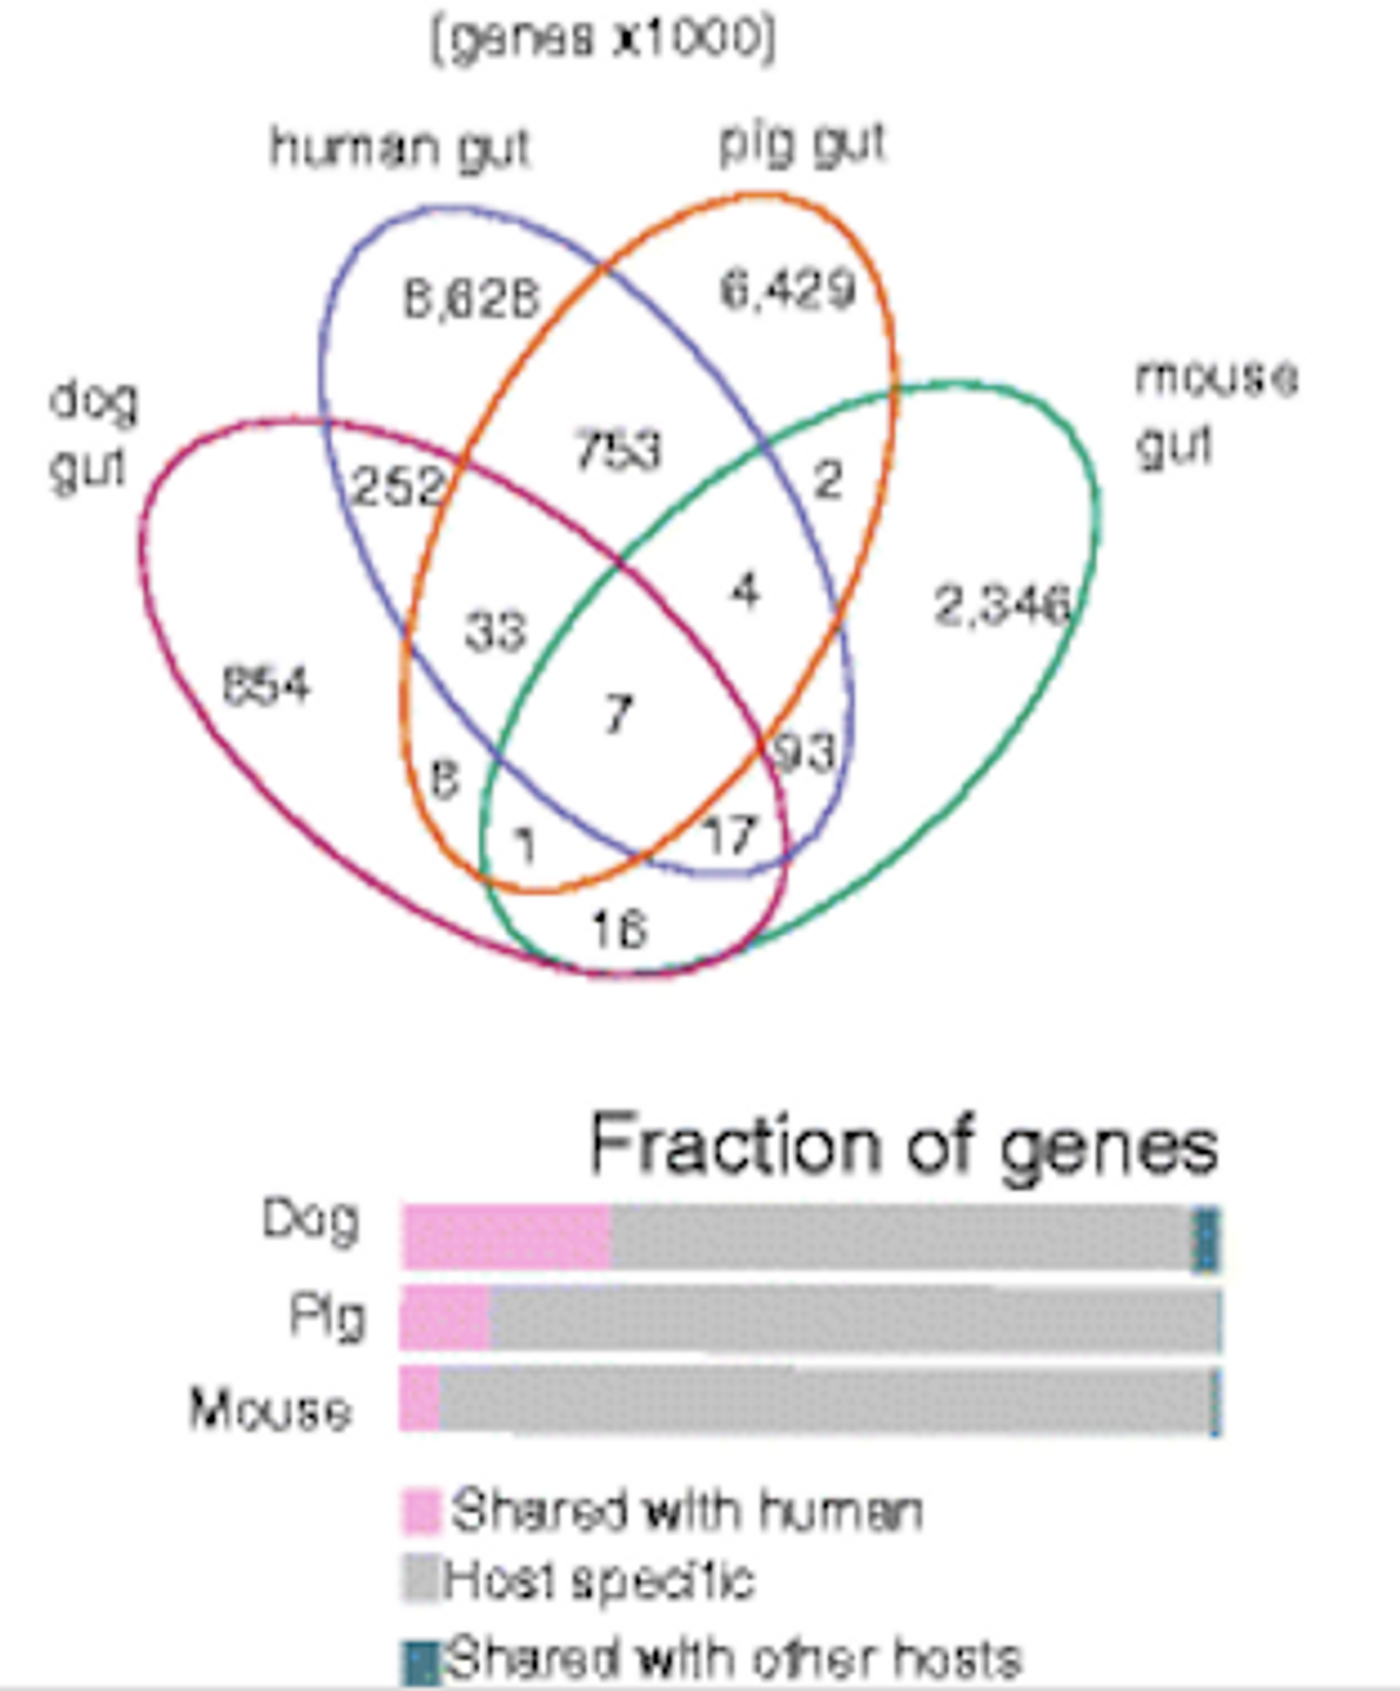 A diagram illustrating overlap in bacterial genes carried by different animals. / Image credit: Coelho et al Microbiome 2018